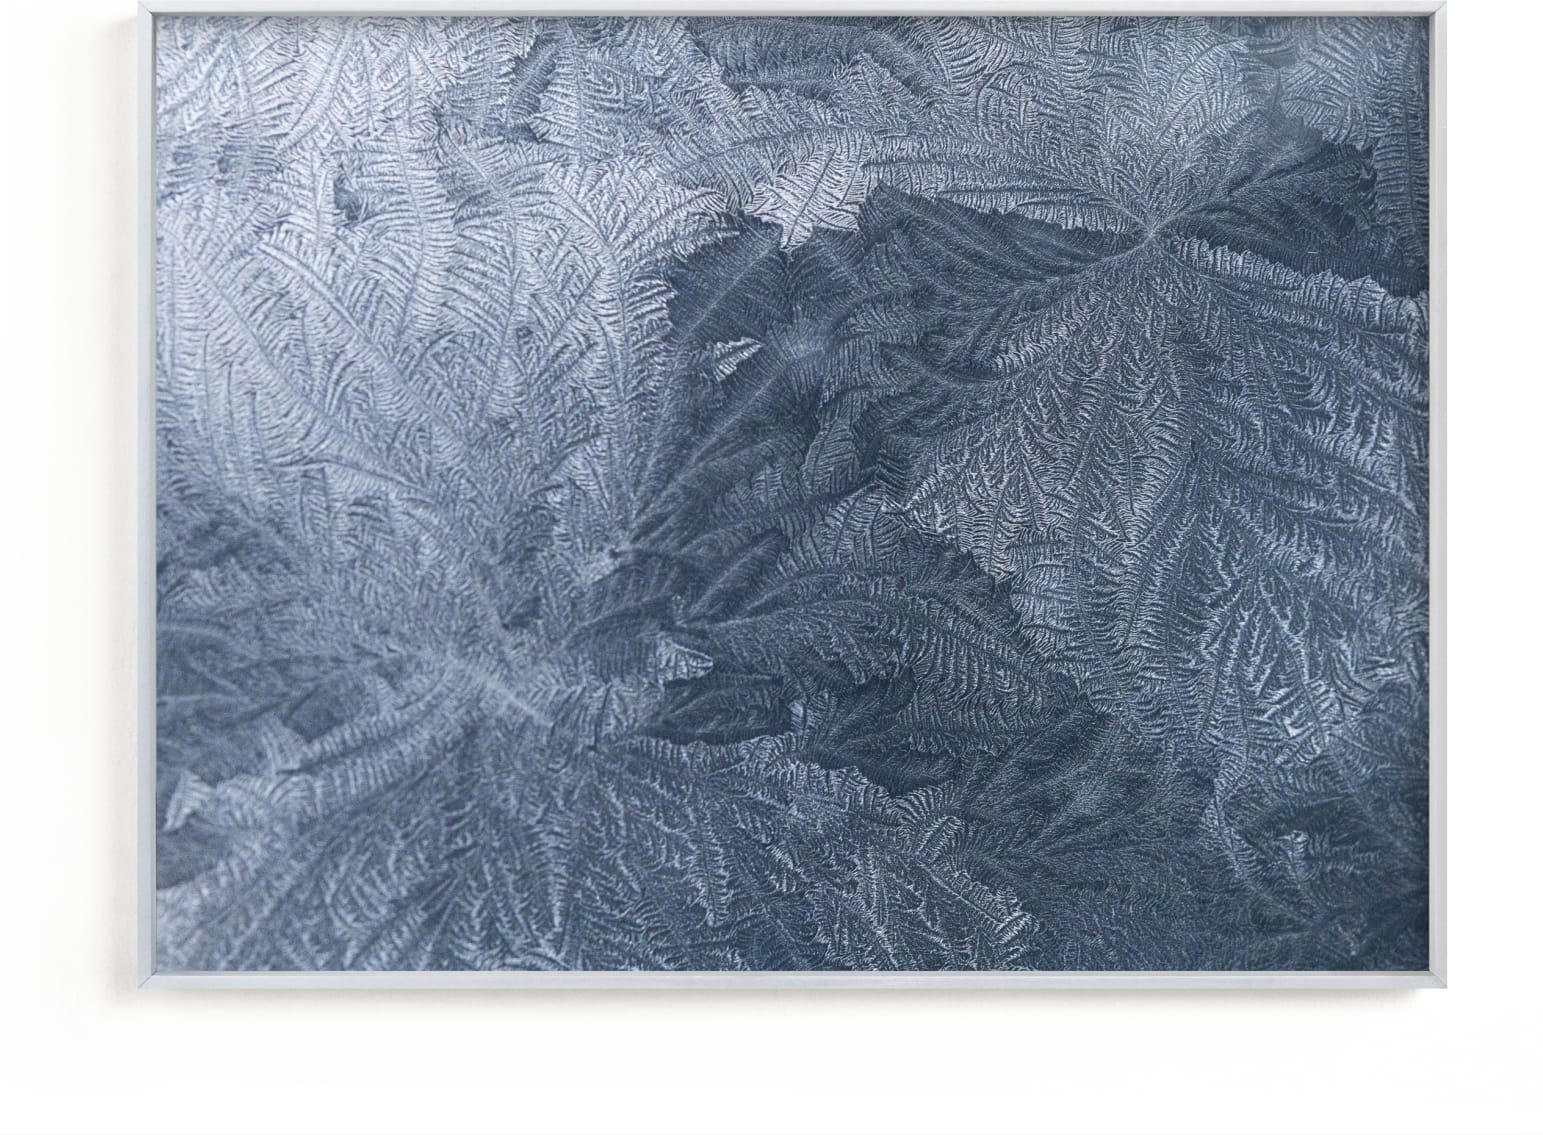 This is a blue art by Janie Allen called Winter Etching No. 2.